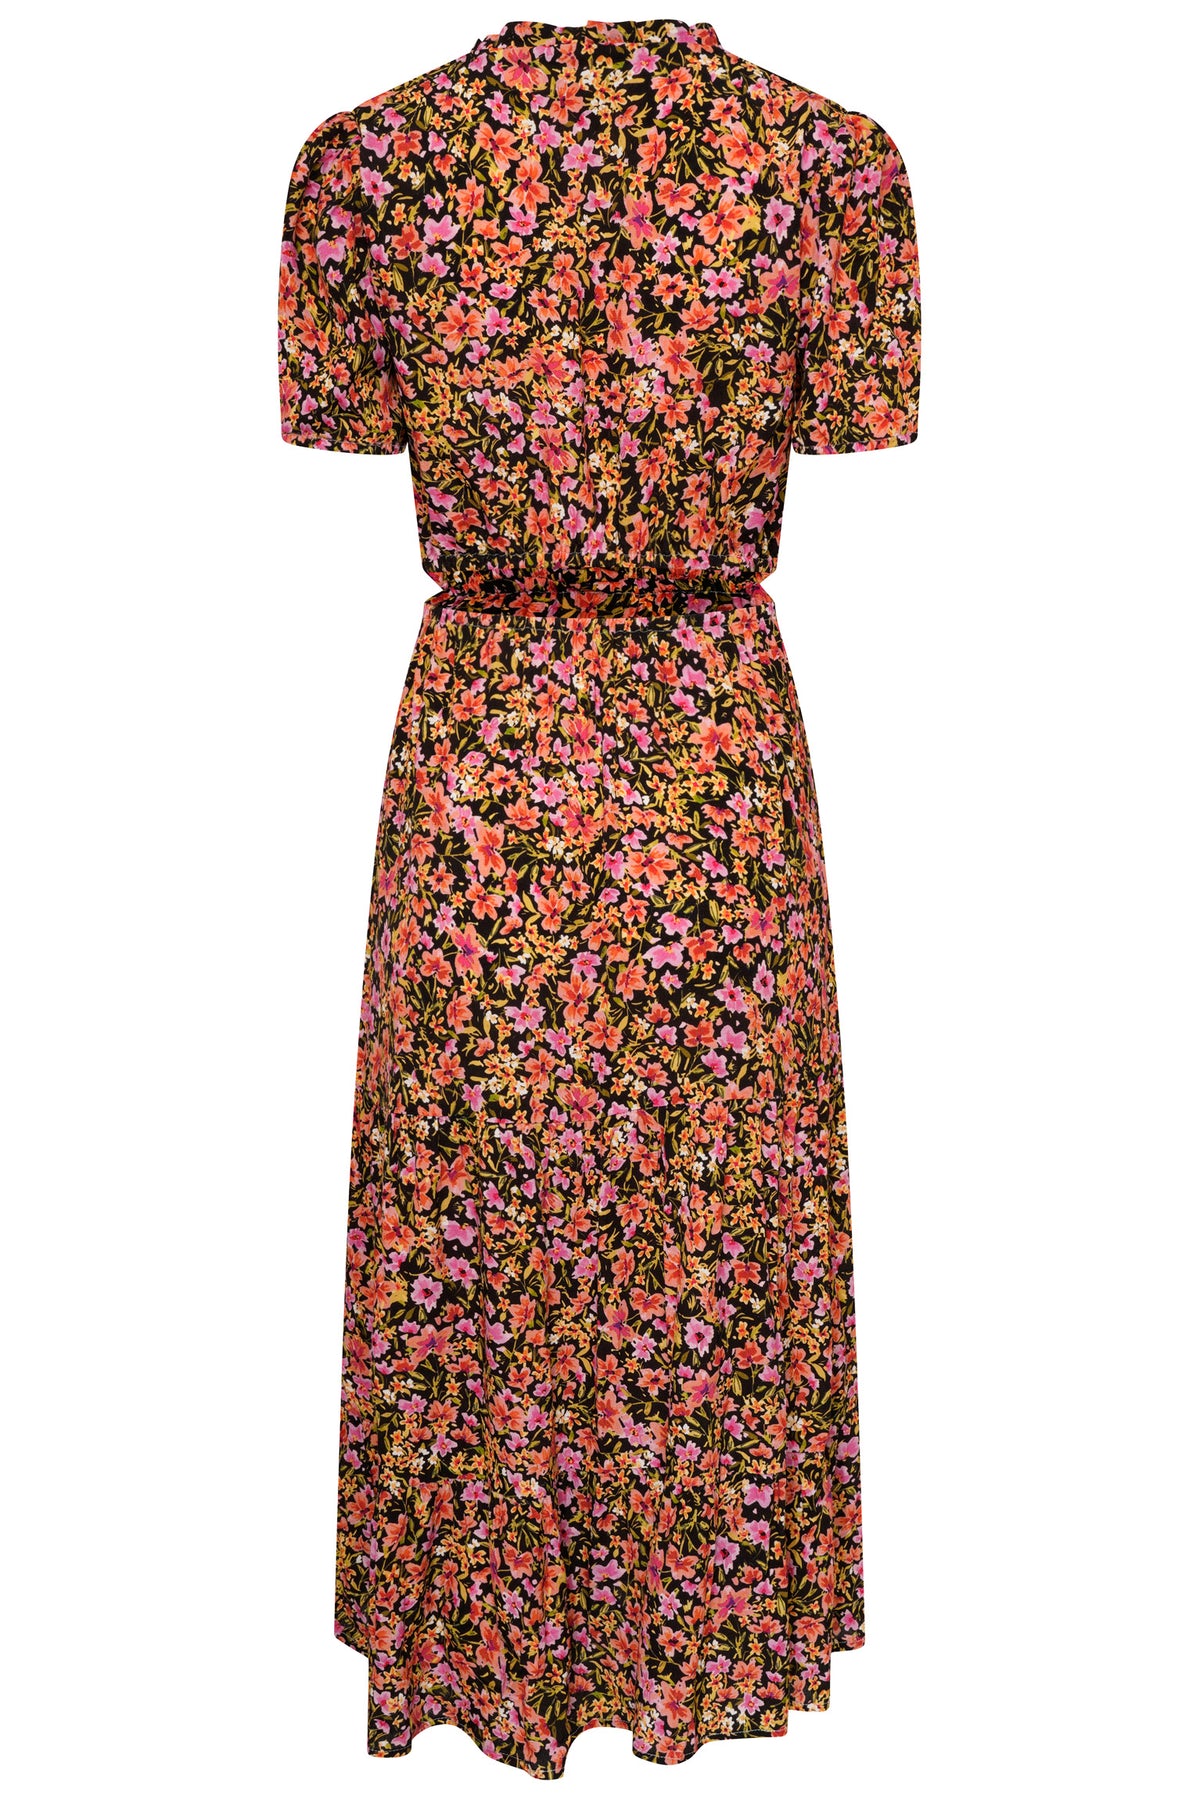 Carlotta Floral Midi Dress With Side Cut Outs